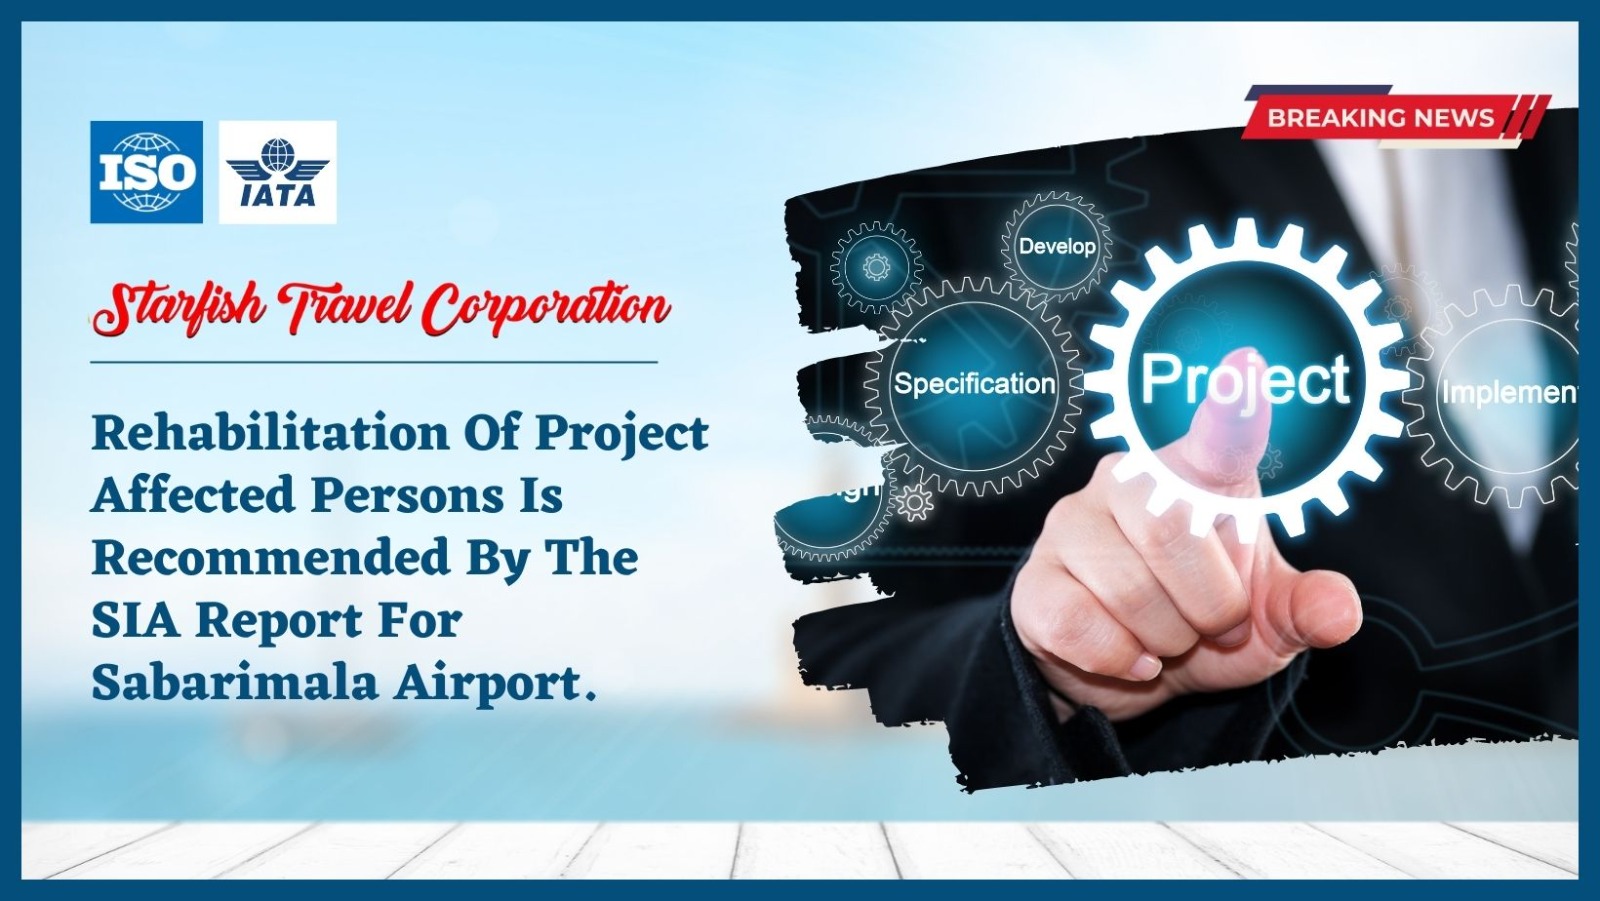 You are currently viewing Rehabilitation Of Project Affected Persons Is Recommended By The SIA Report For Sabarimala Airport.